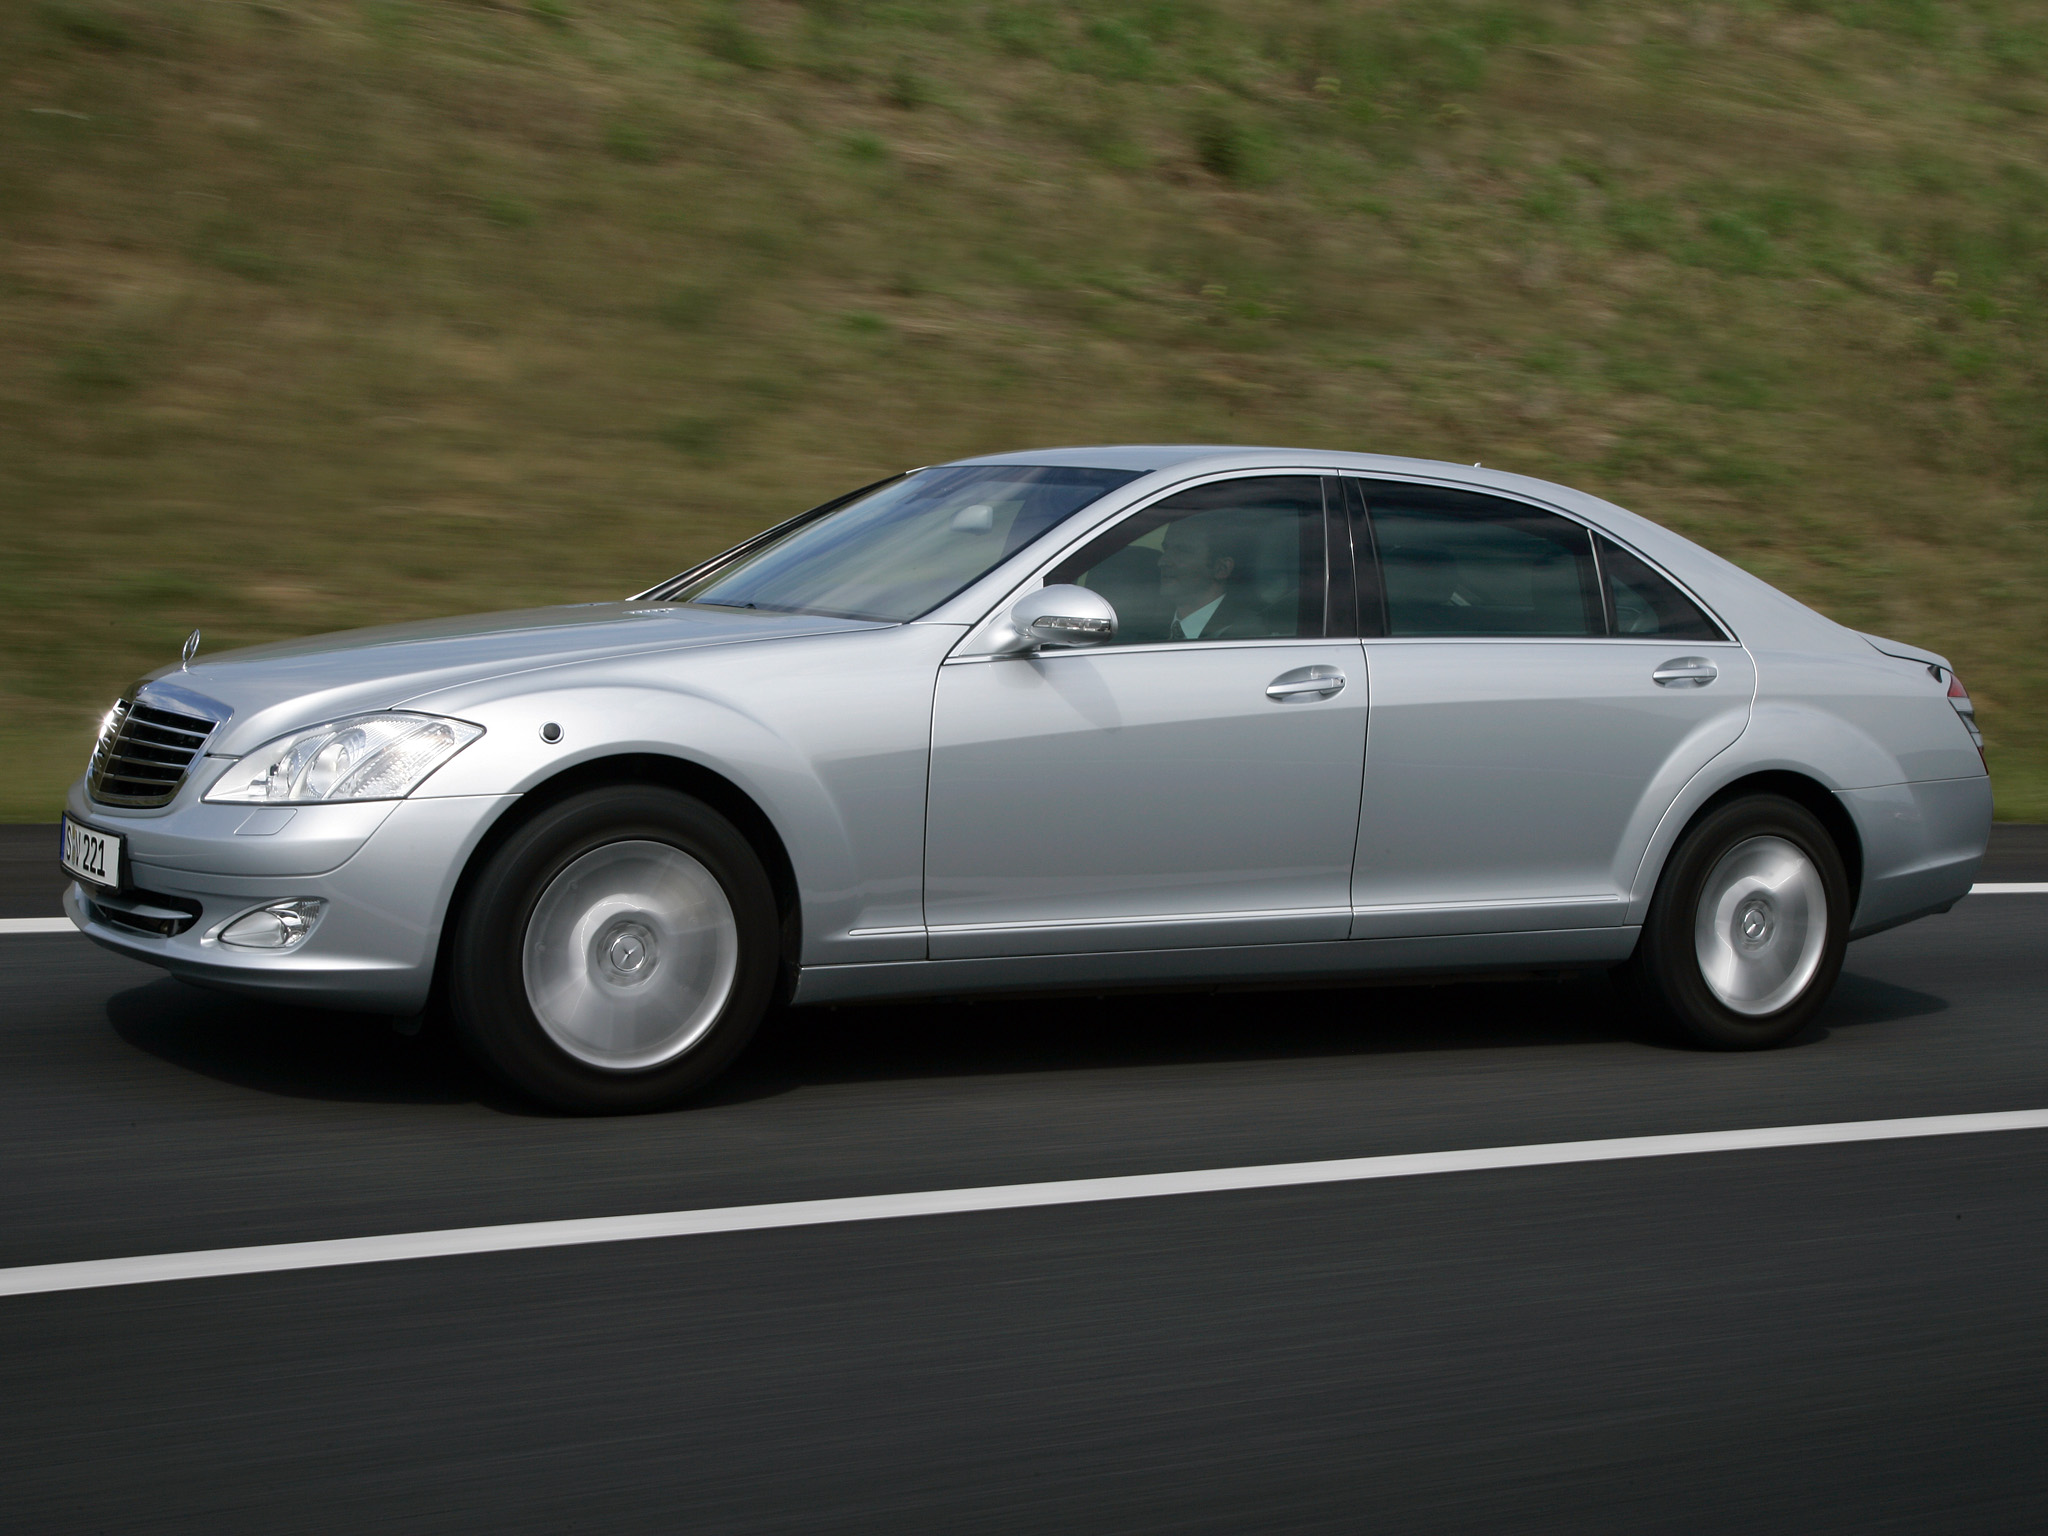 2007, Armored, Mercedes, Benz, S, 600, Guard, W221, Luxury Wallpaper